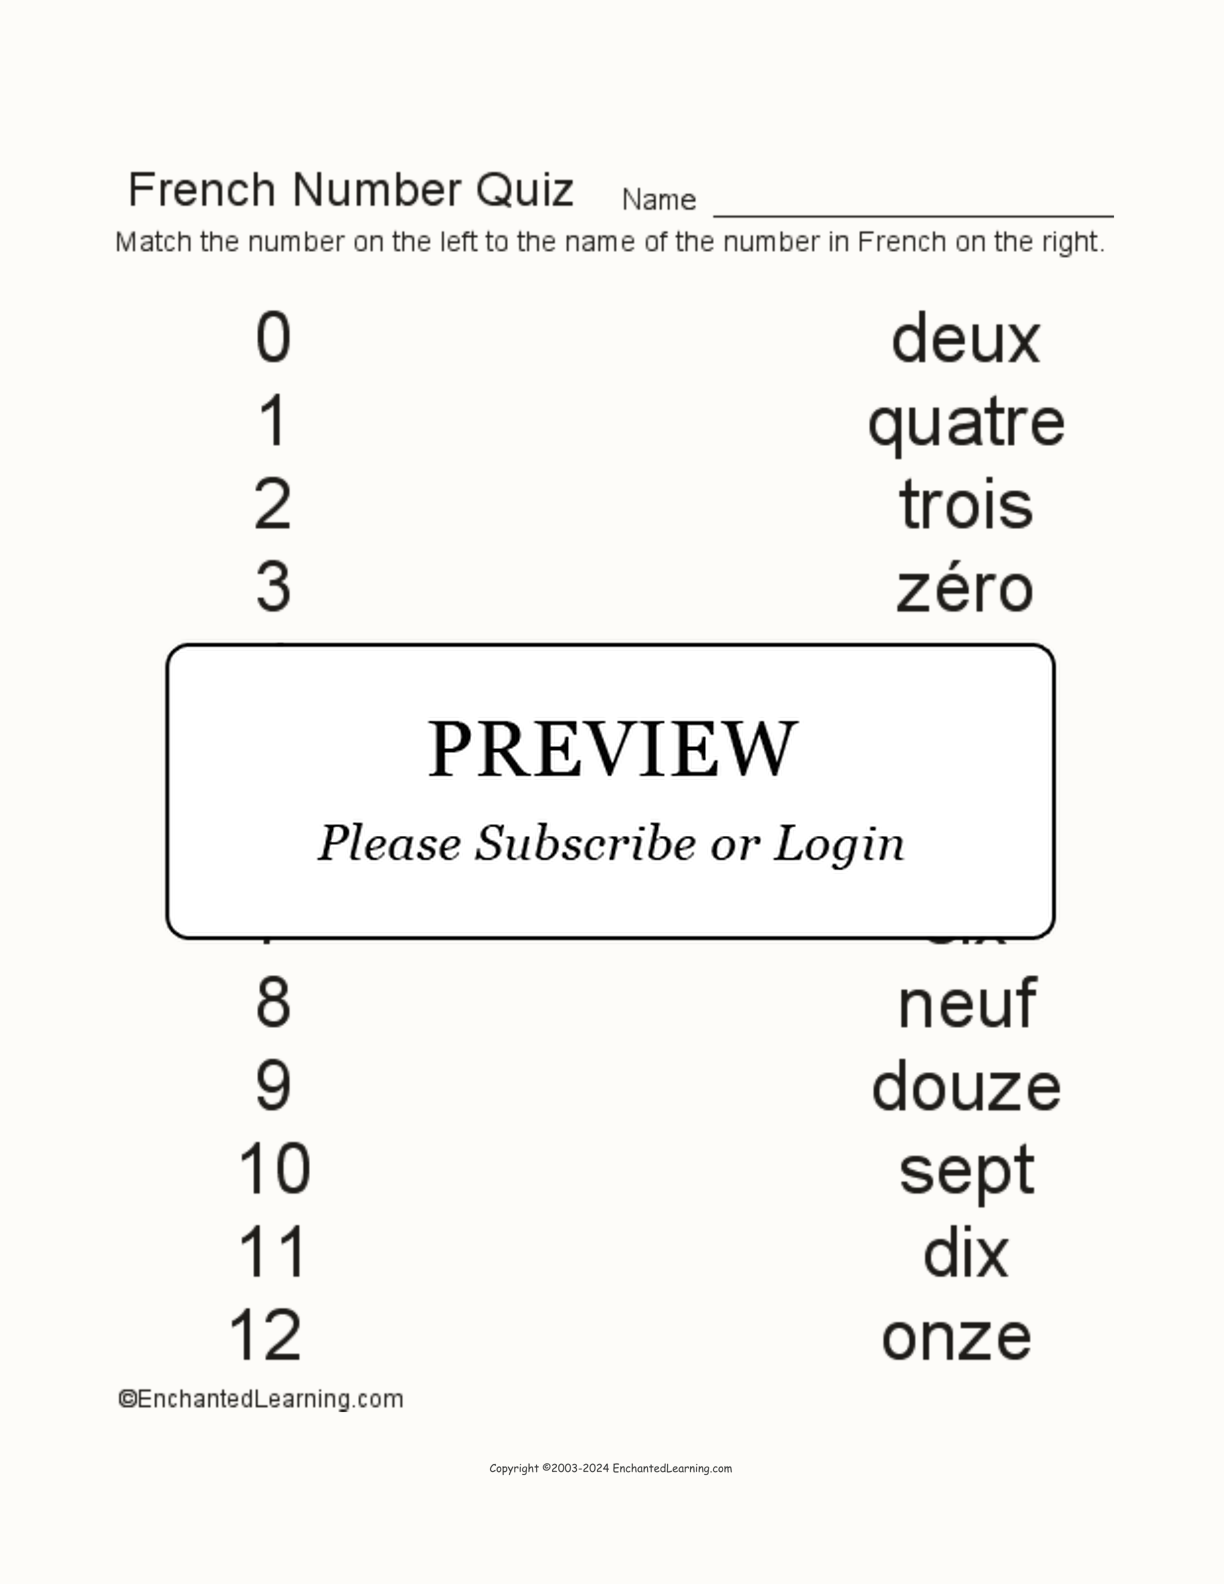 French Number Quiz interactive worksheet page 1